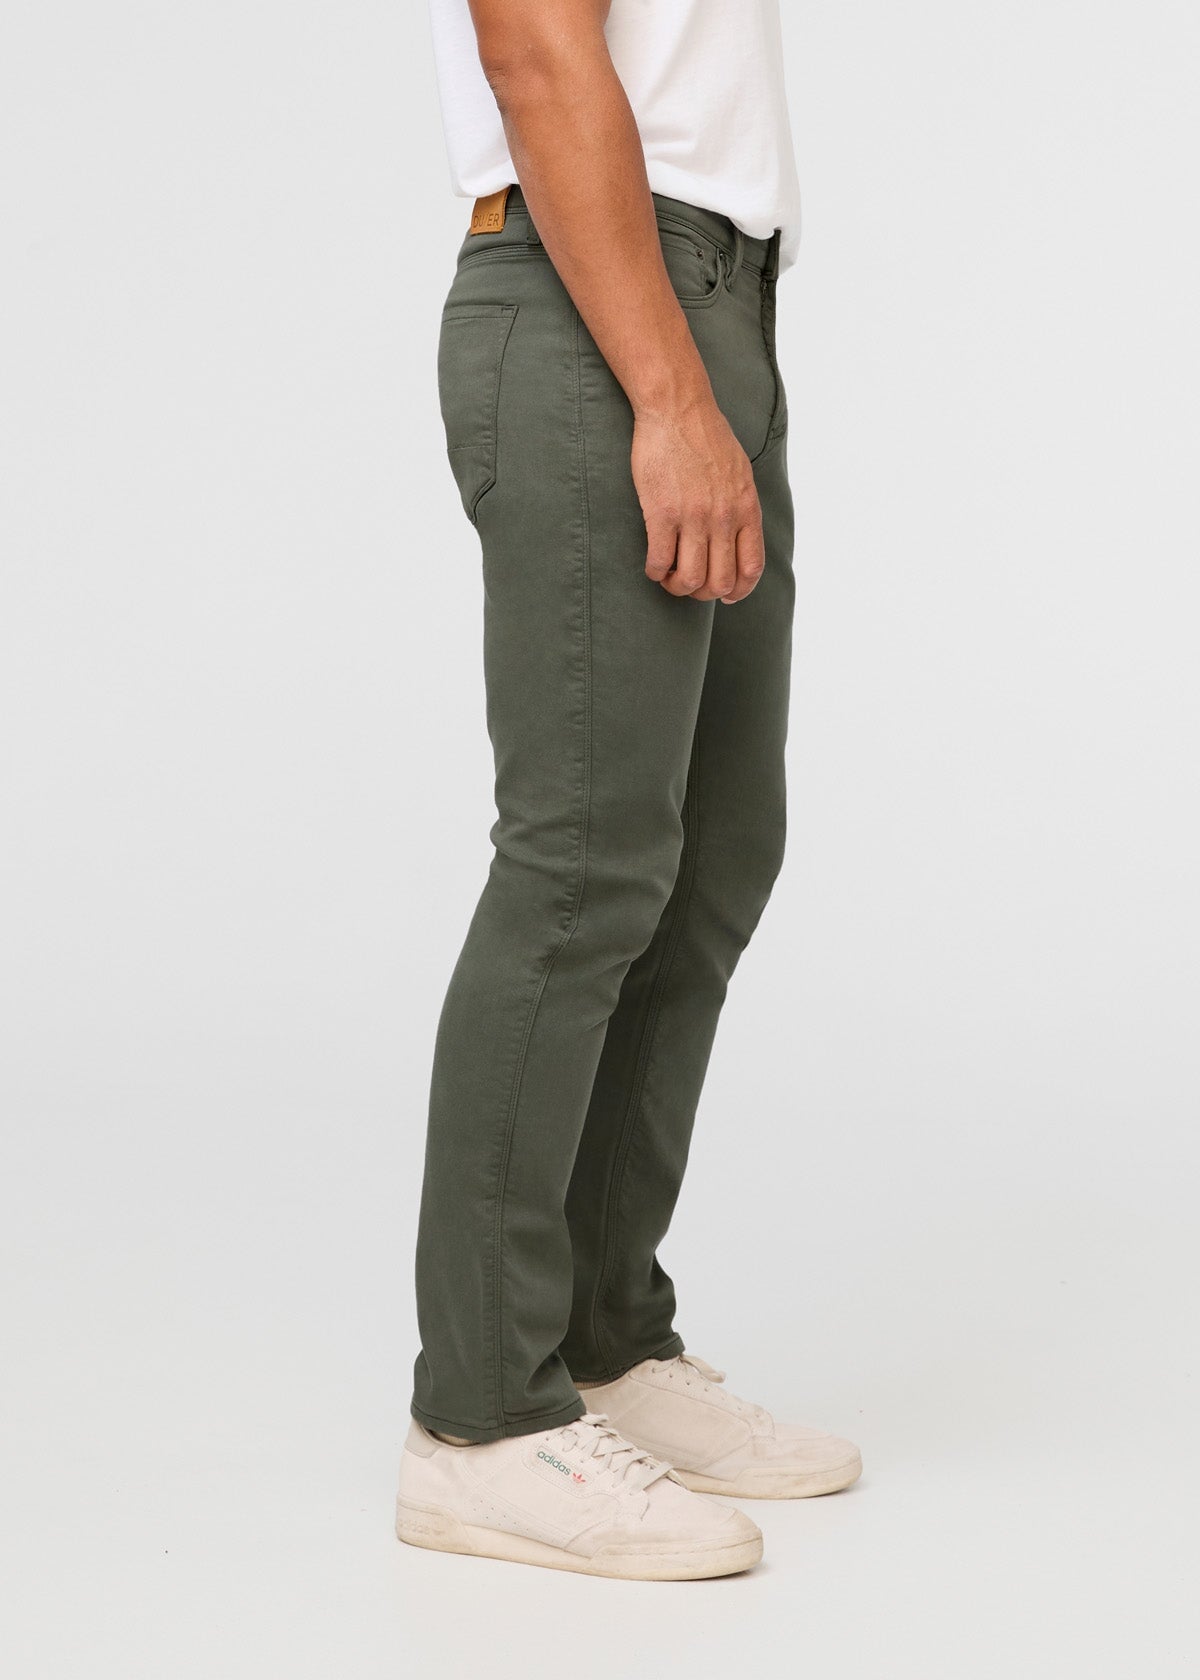 Mens Cotton Polyester Cargo Pants, Mens Pure Color Relaxed Fit